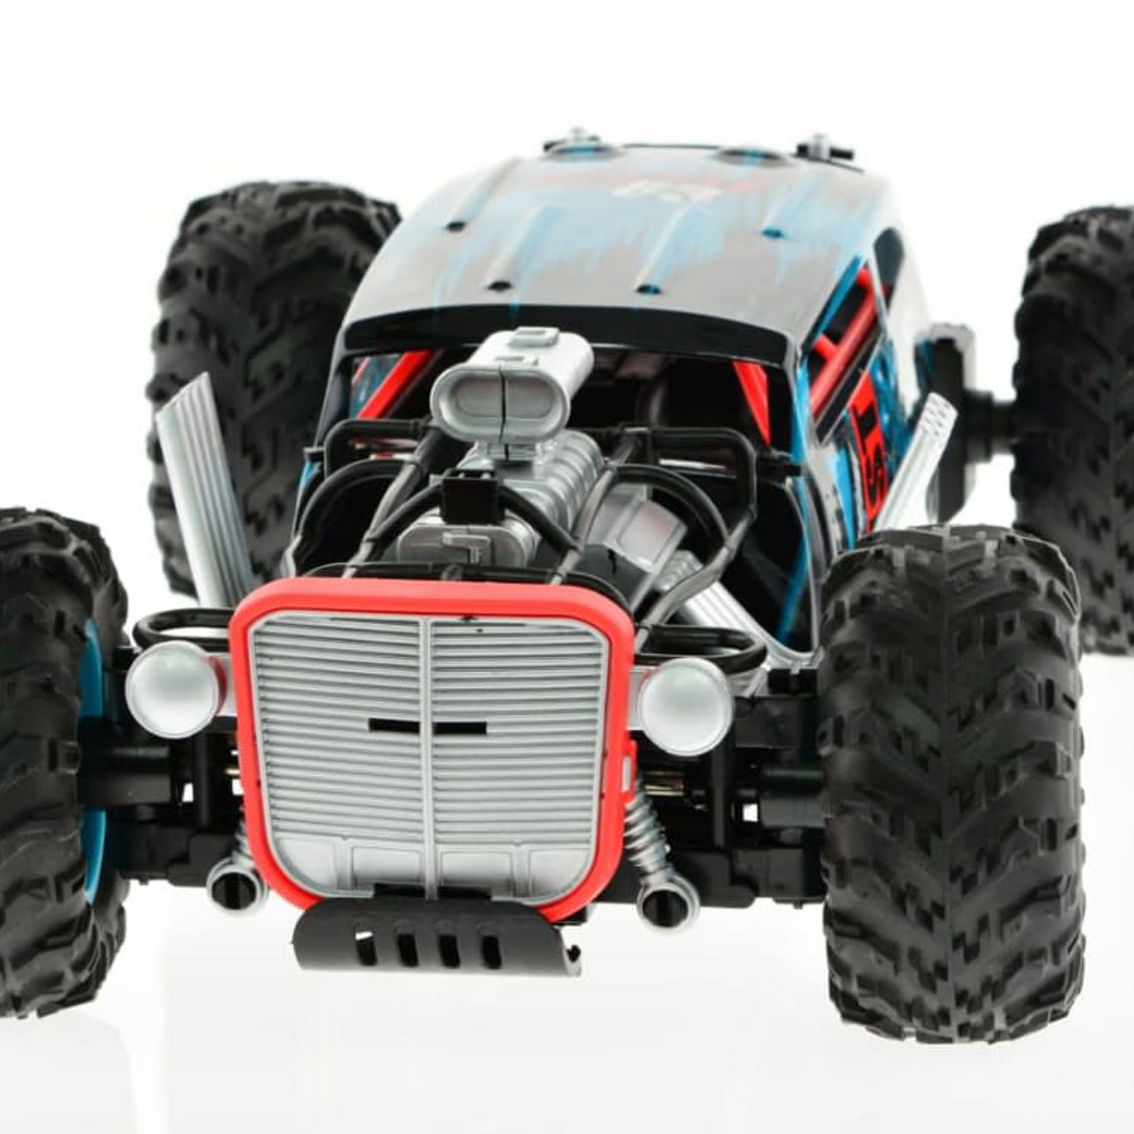 CIS-333-GS1912B-B 1:12 scale 4WD roadster - Blue - Image 4 of 5